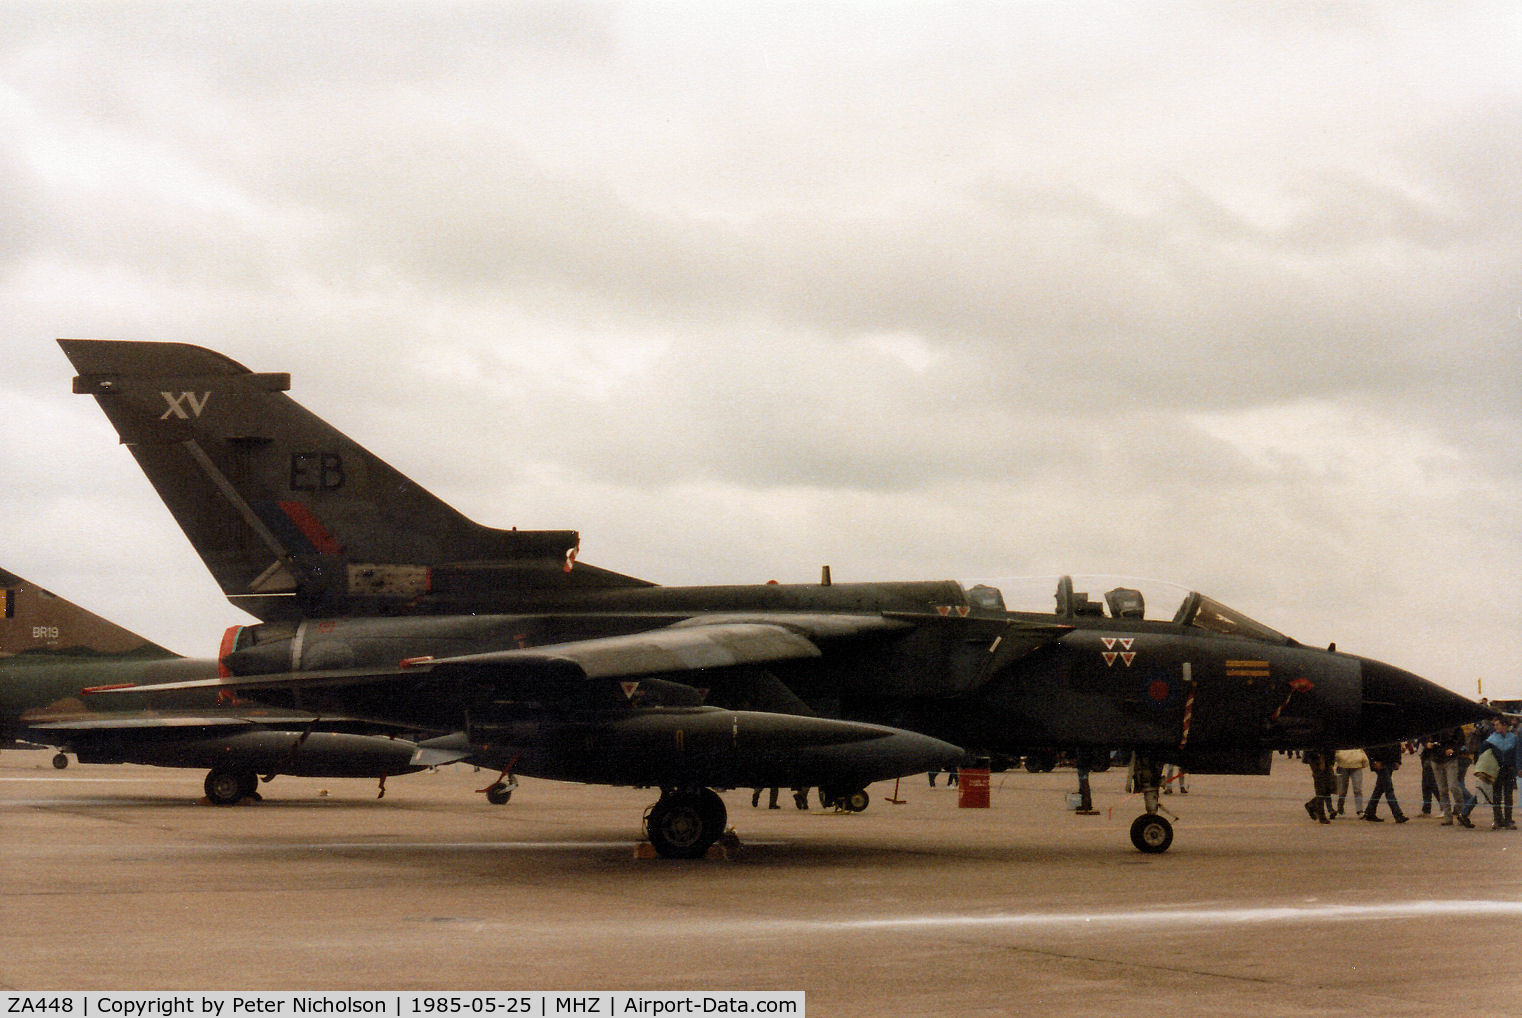 ZA448, 1983 Panavia Tornado GR.1 C/N 237/BS078/3114, Tornado GR.1 of 15 Squadron at RAF Bruggen on display at the 1985 RAF Mildenhall Air Fete. Sadly, this aircraft crashed on the Nellis Range, Nevada during a Green Flag Exercise in March 1988.